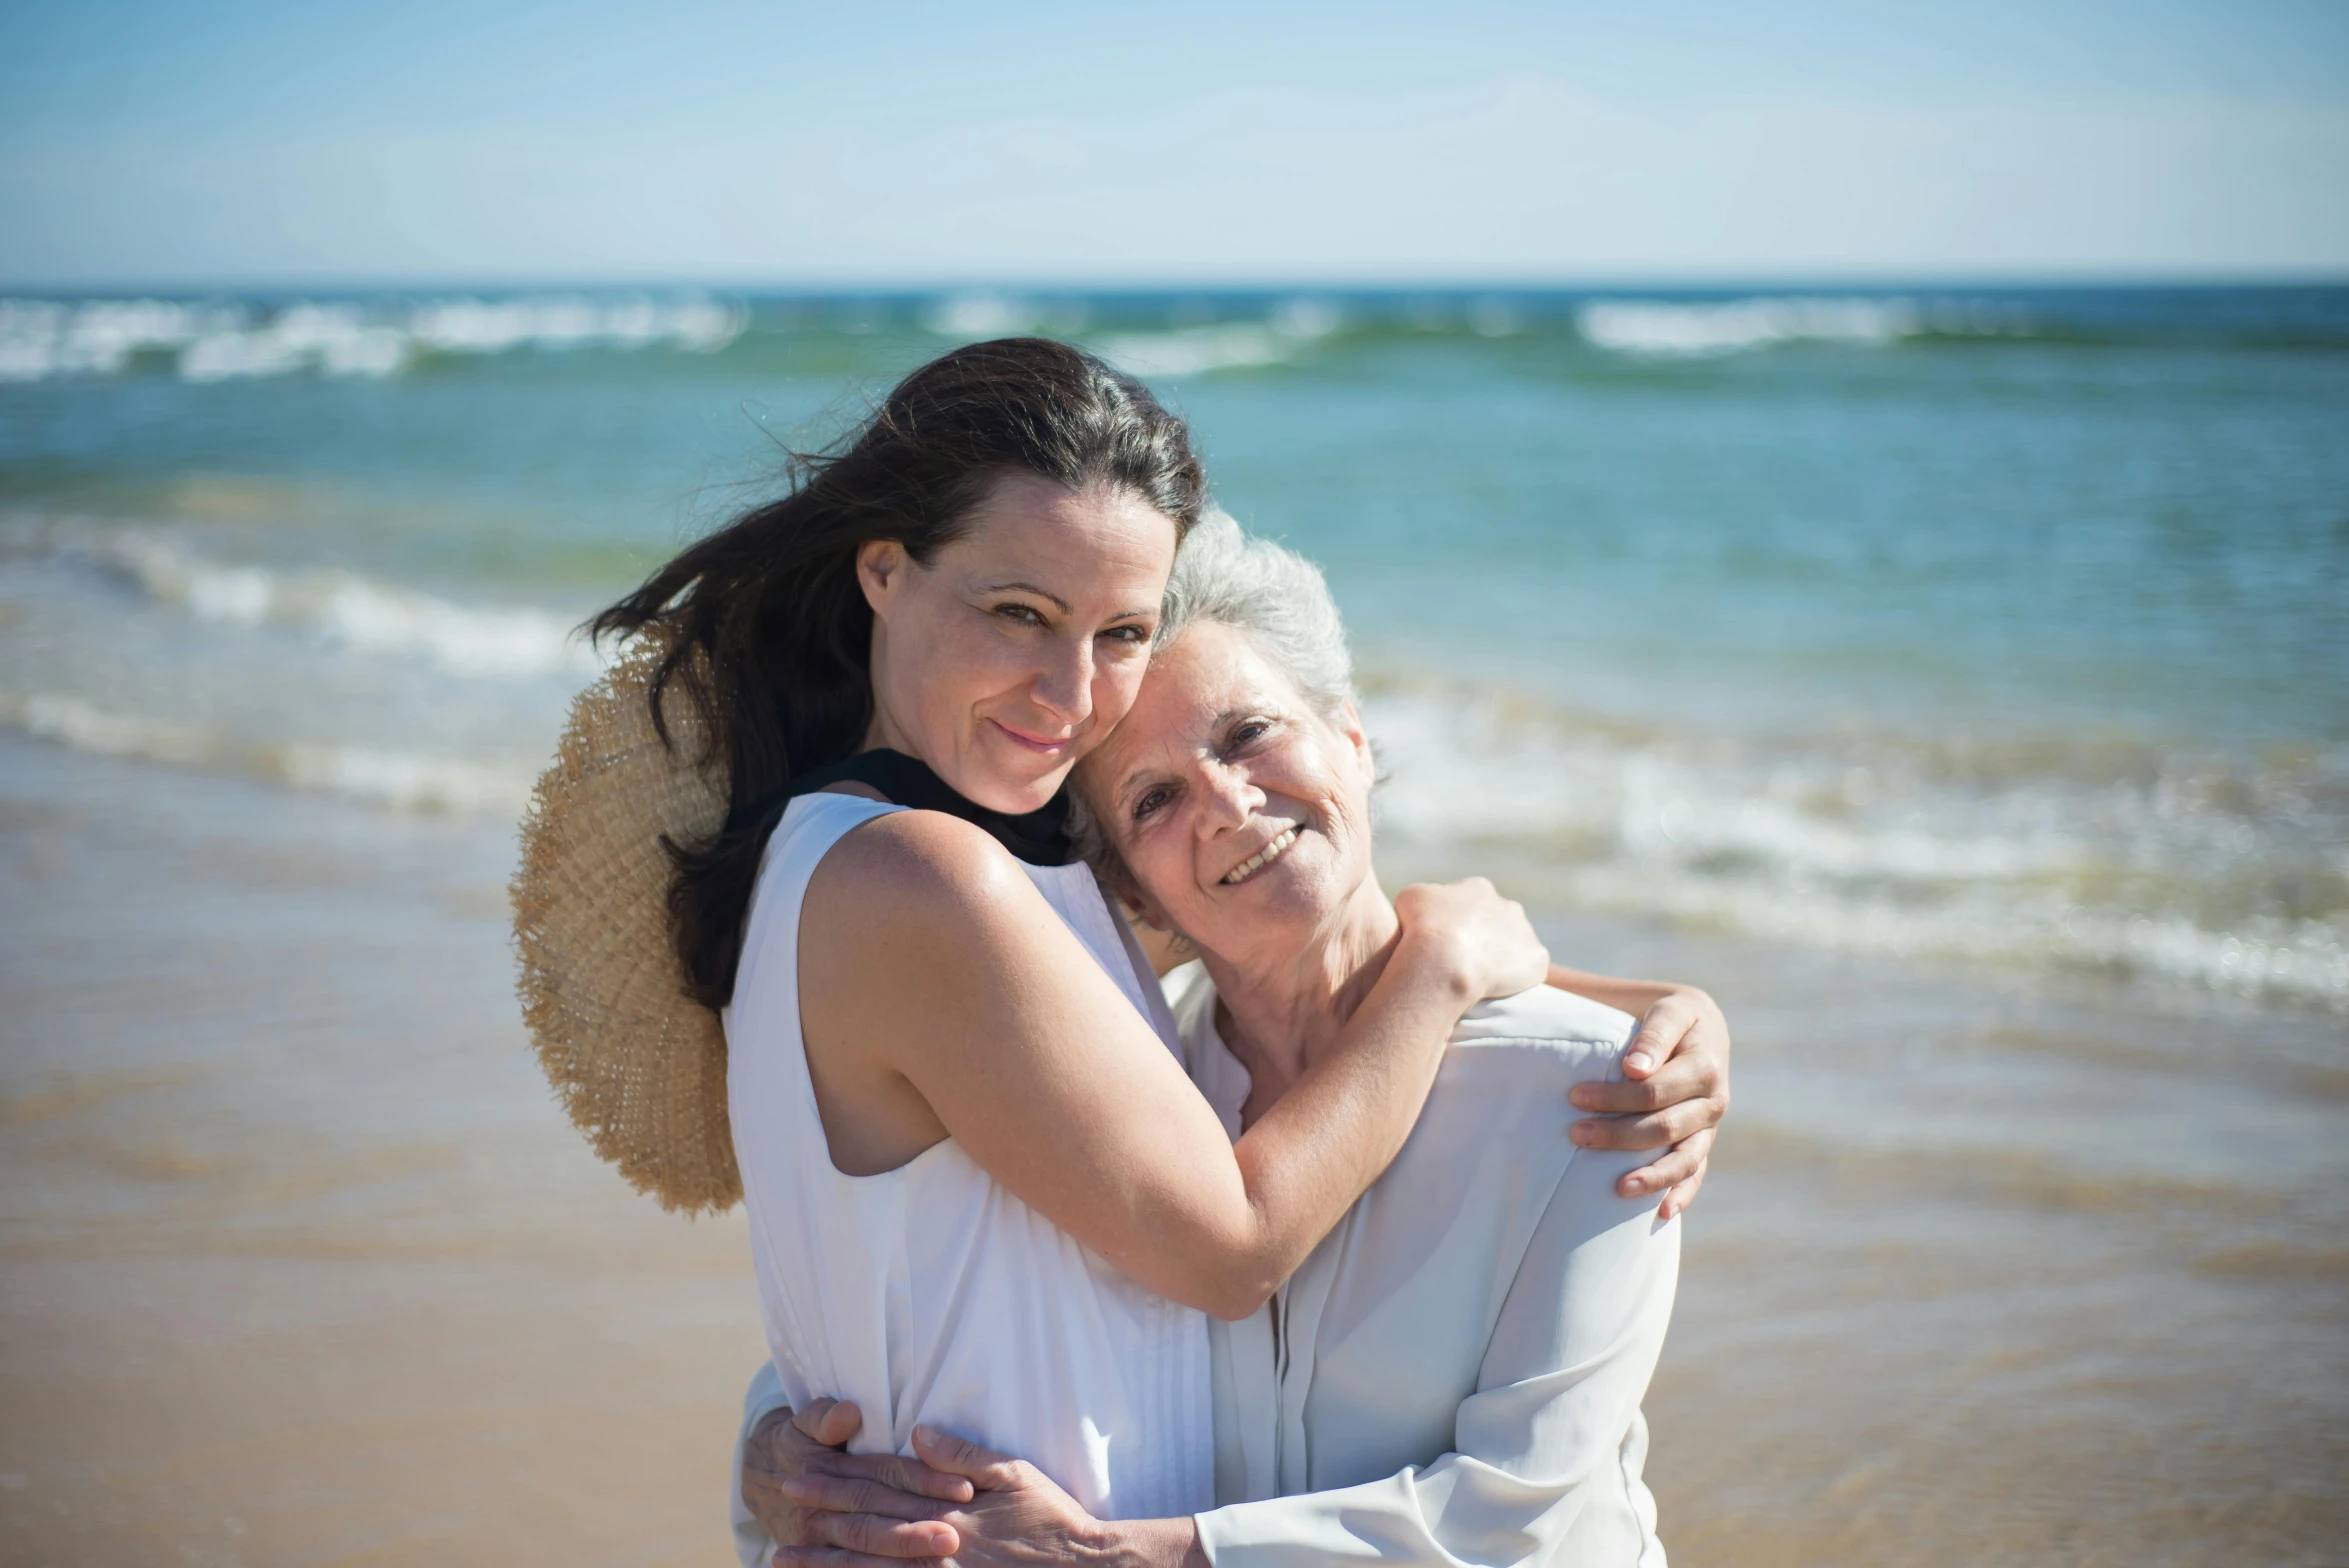 two women hugging each other on the beach, a portrait, by Arabella Rankin, pixabay contest winner, renaissance, maternal photography 4 k, avatar image, old and young, soft natural light